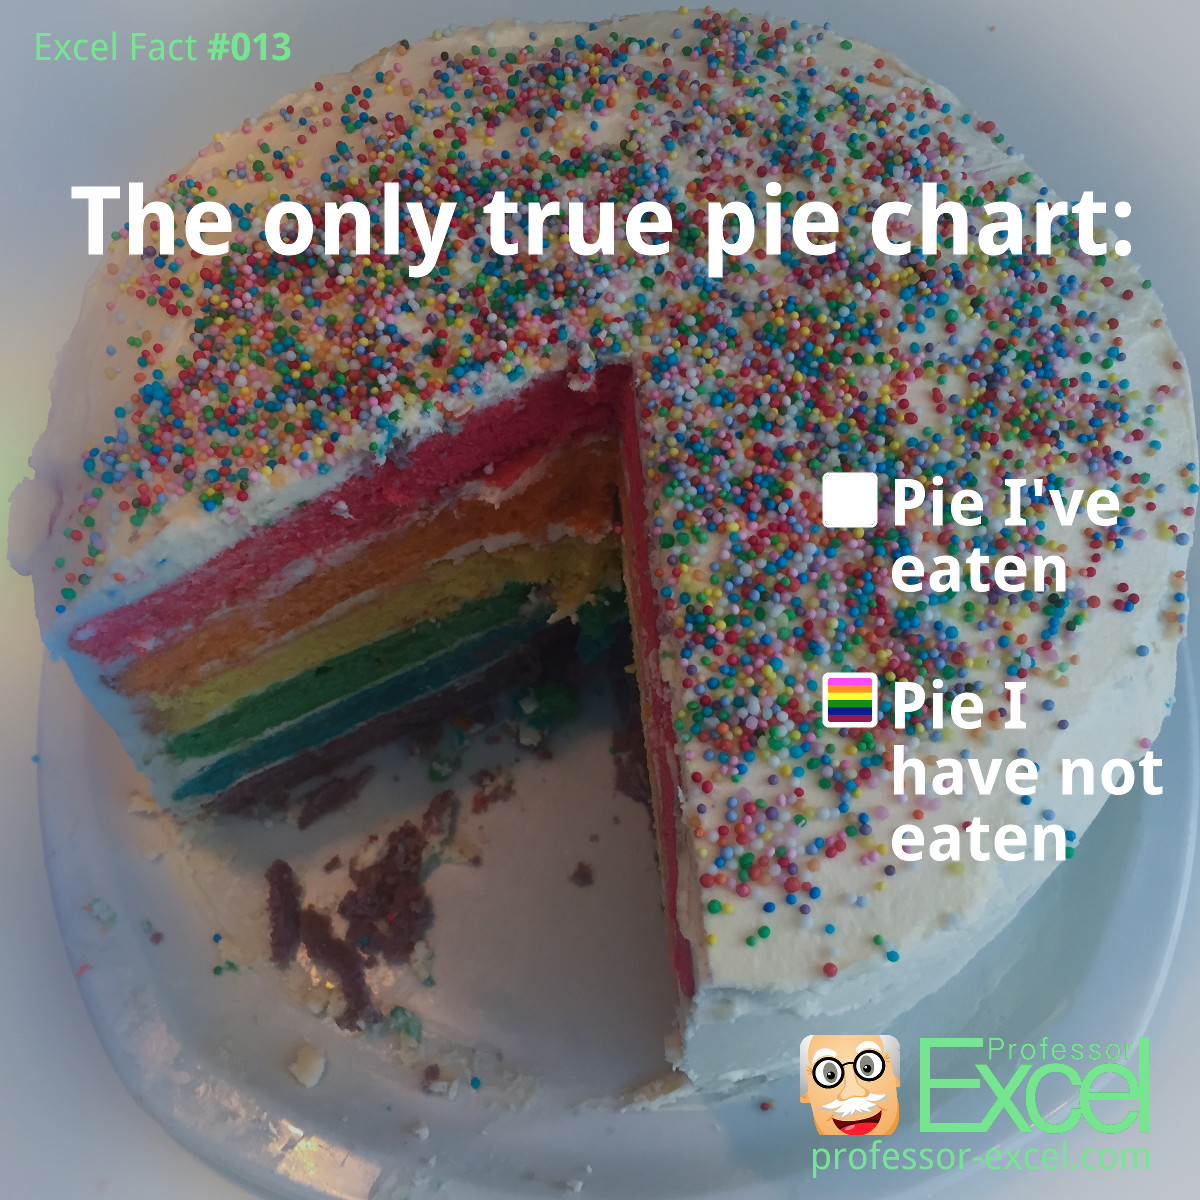 excel, fact, excel fact, true, pie, chart, real, excel